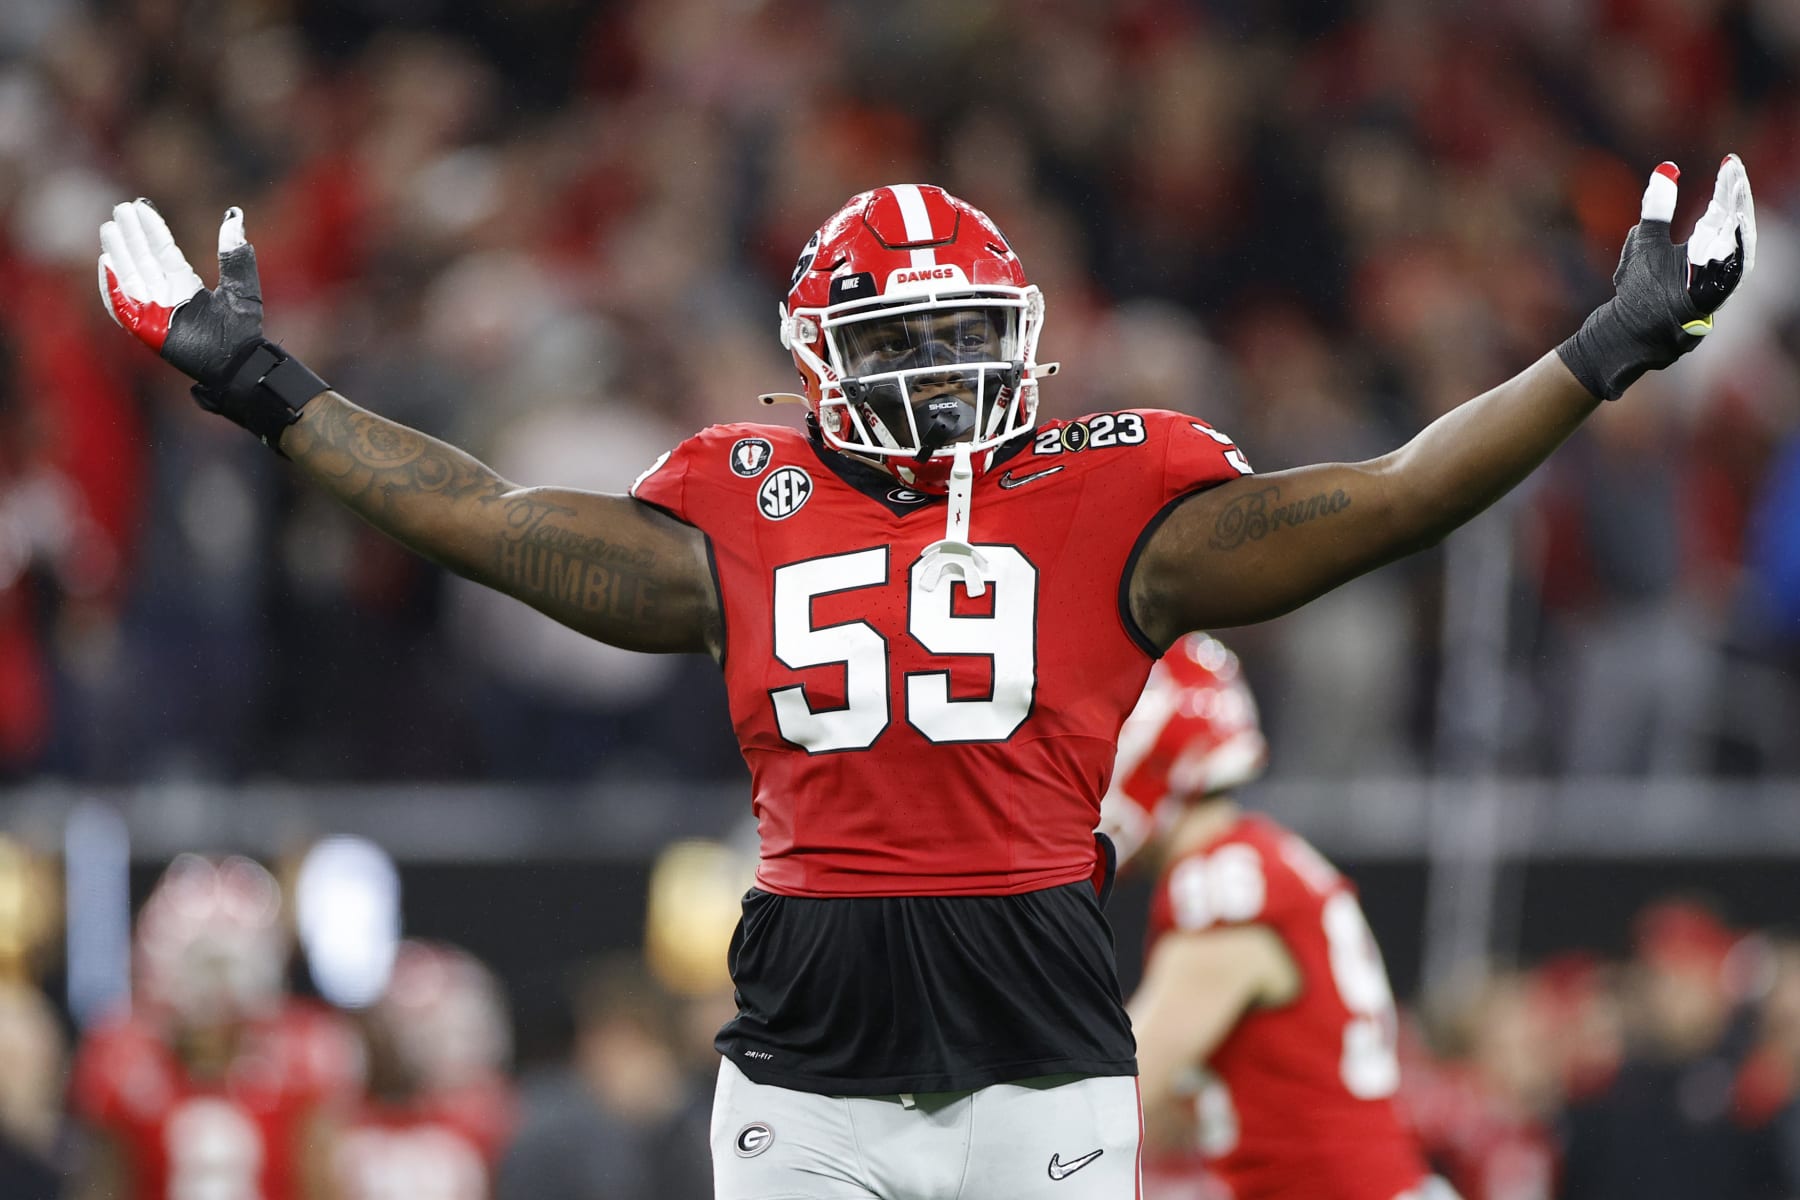 Zay Flowers tells Chiefs GM to come get him ahead of 2023 NFL Draft